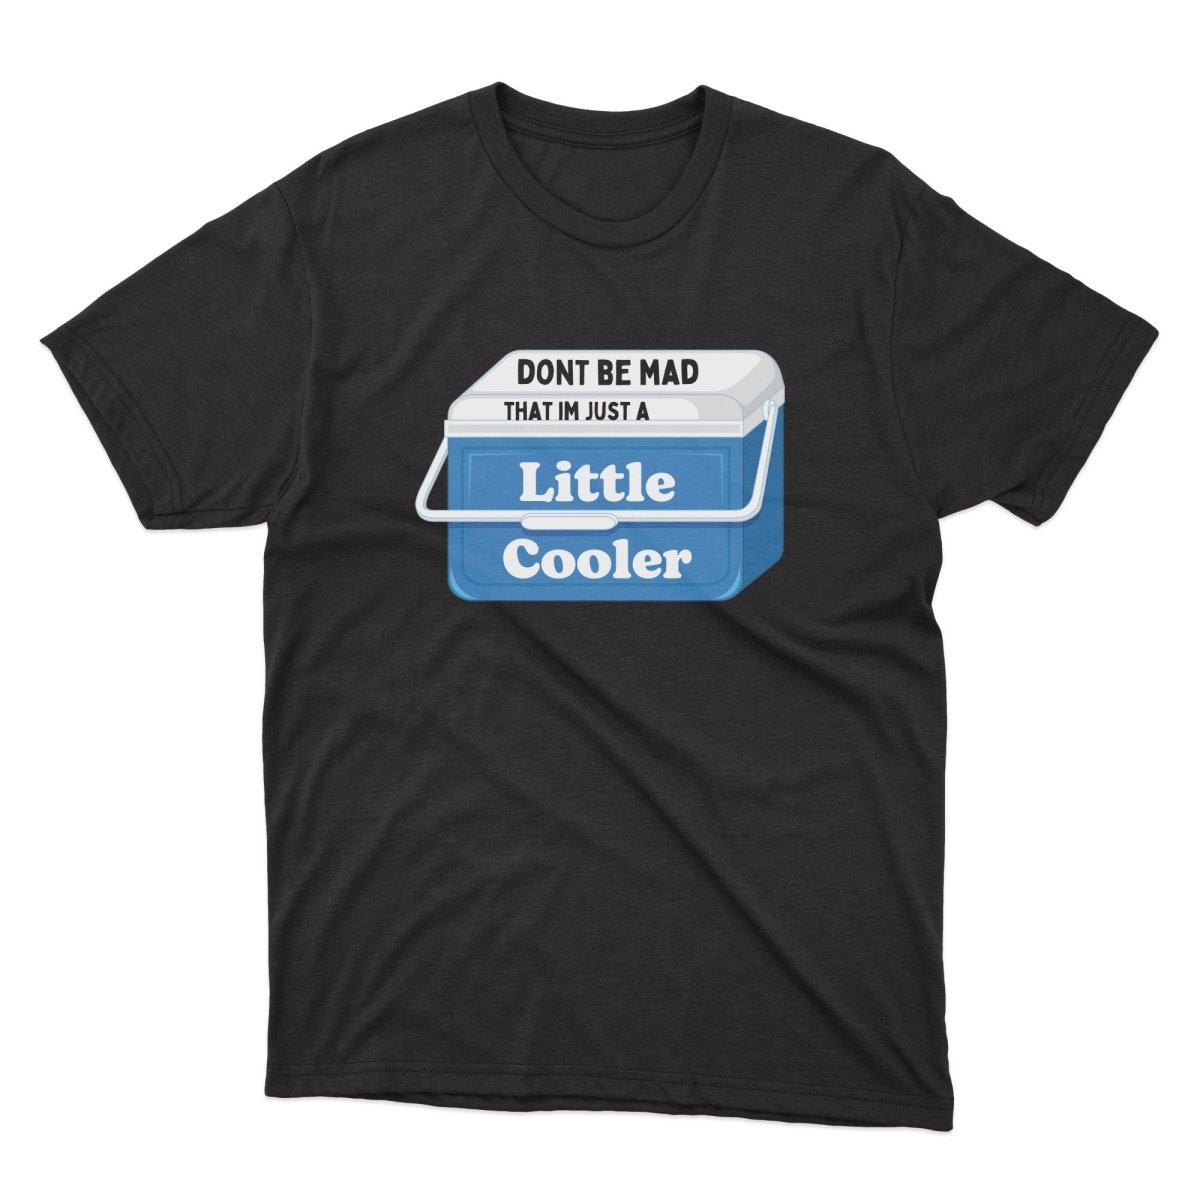 Don't Be Hate Me Because I'm A Little Cooler Shirt - stickerbullDon't Be Hate Me Because I'm A Little Cooler ShirtShirtsPrintifystickerbull14369953206160307742BlackSa black t - shirt with a blue cooler saying don't be mad that